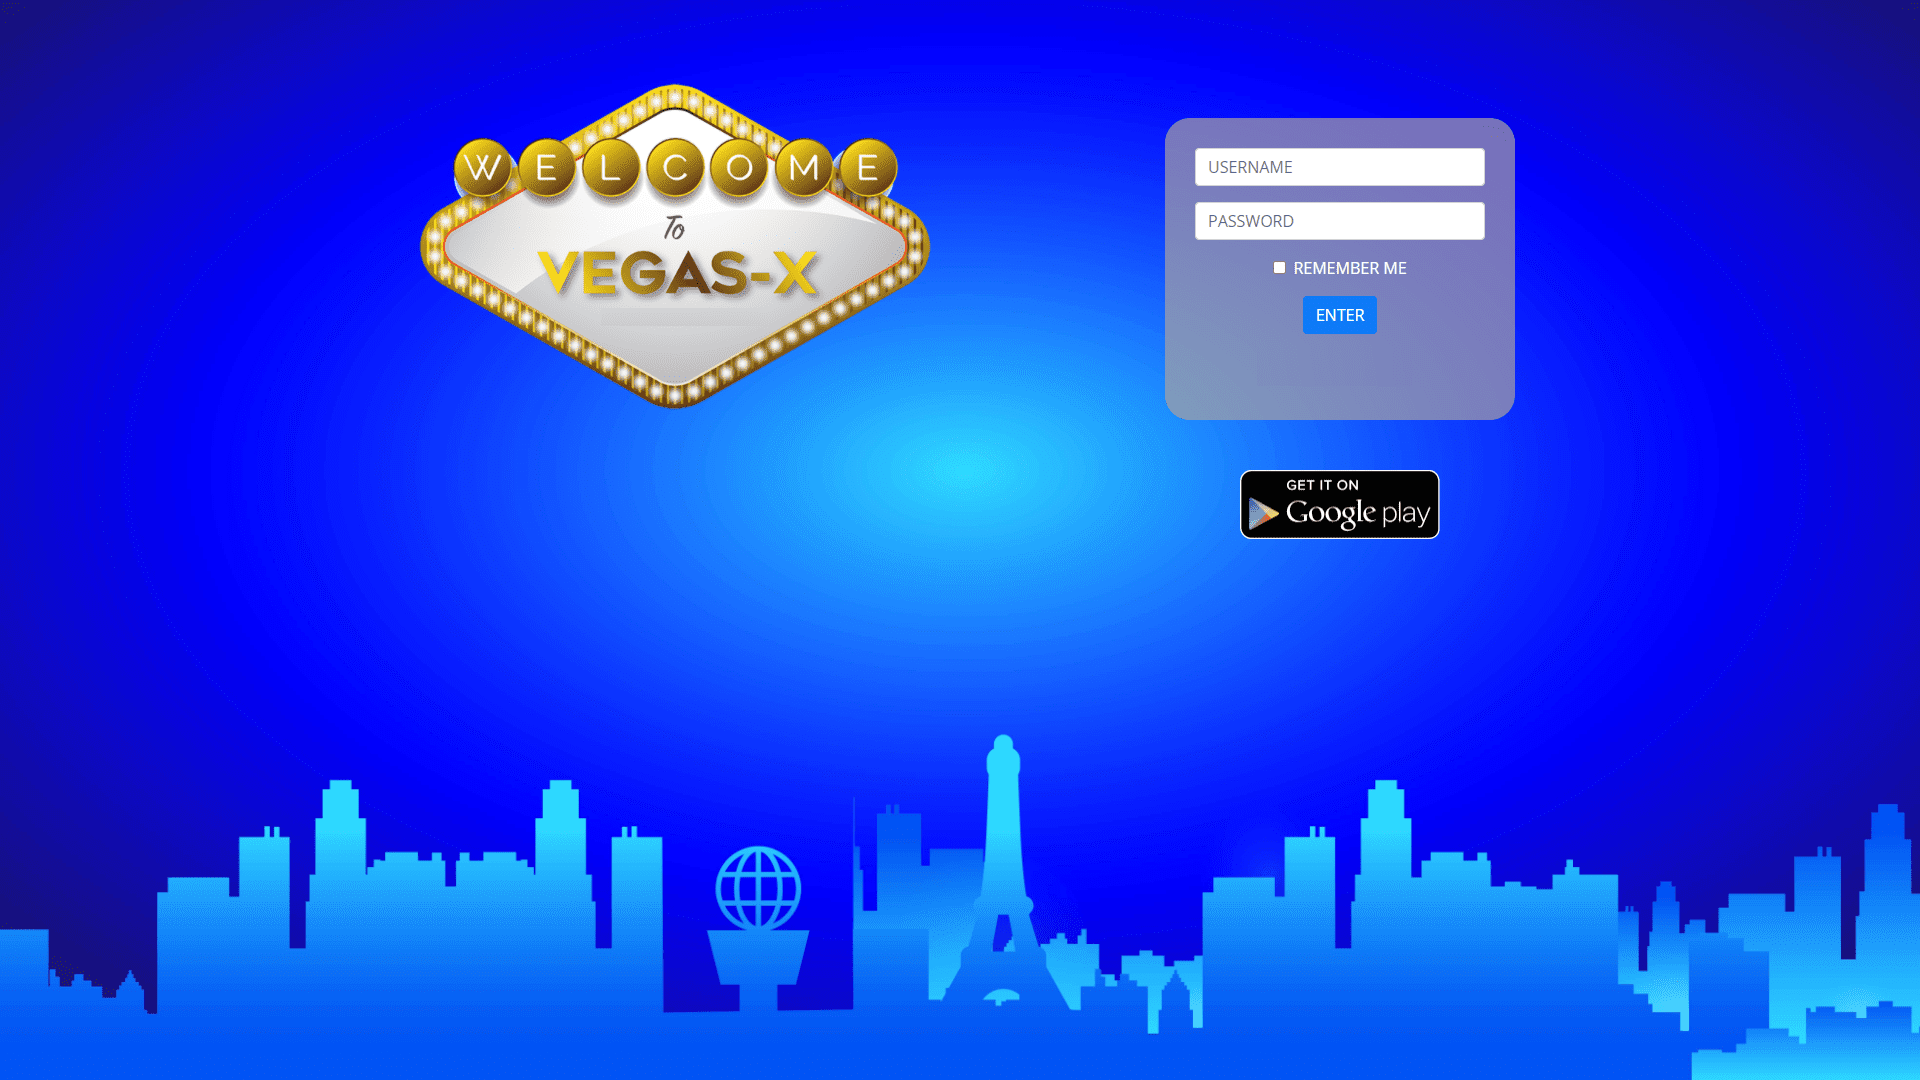 Vegas Image 5.0.0.0 download the last version for iphone